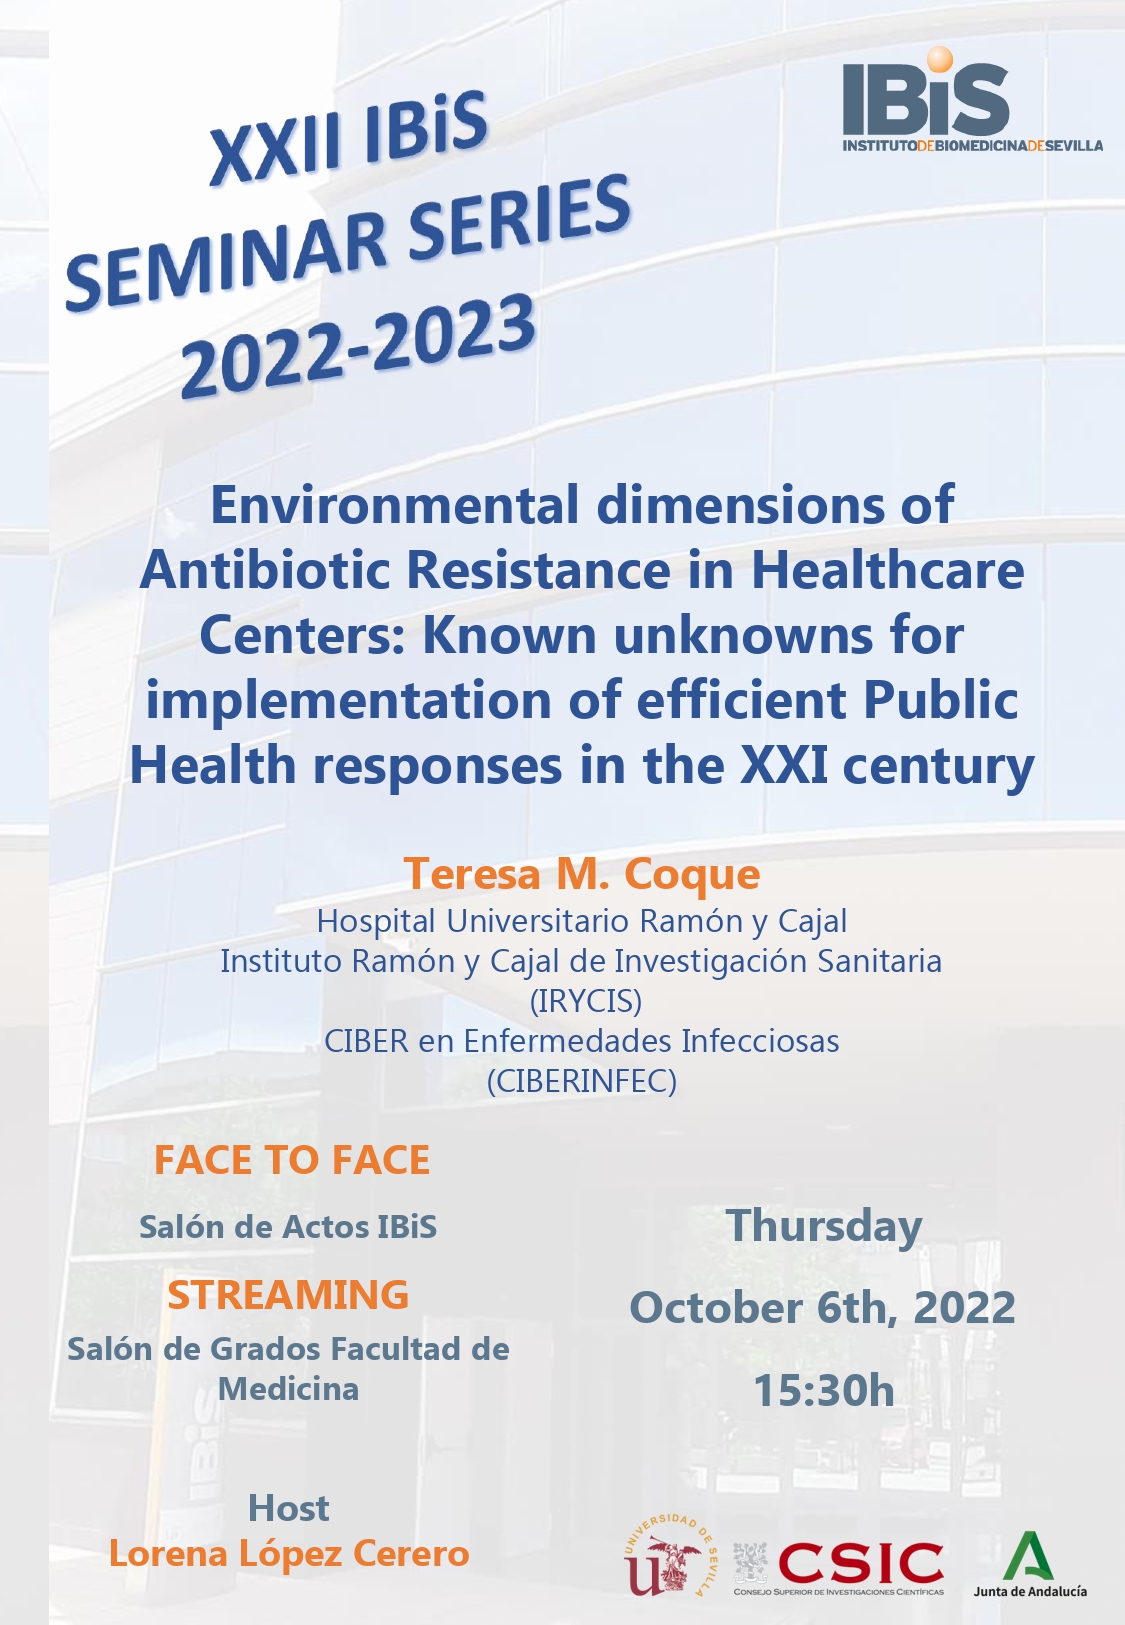 Poster: Environmental dimensions of Antibiotic Resistance in Healthcare Centers: Known unknowns for implementation of efficient Public Health responses in the XXI century